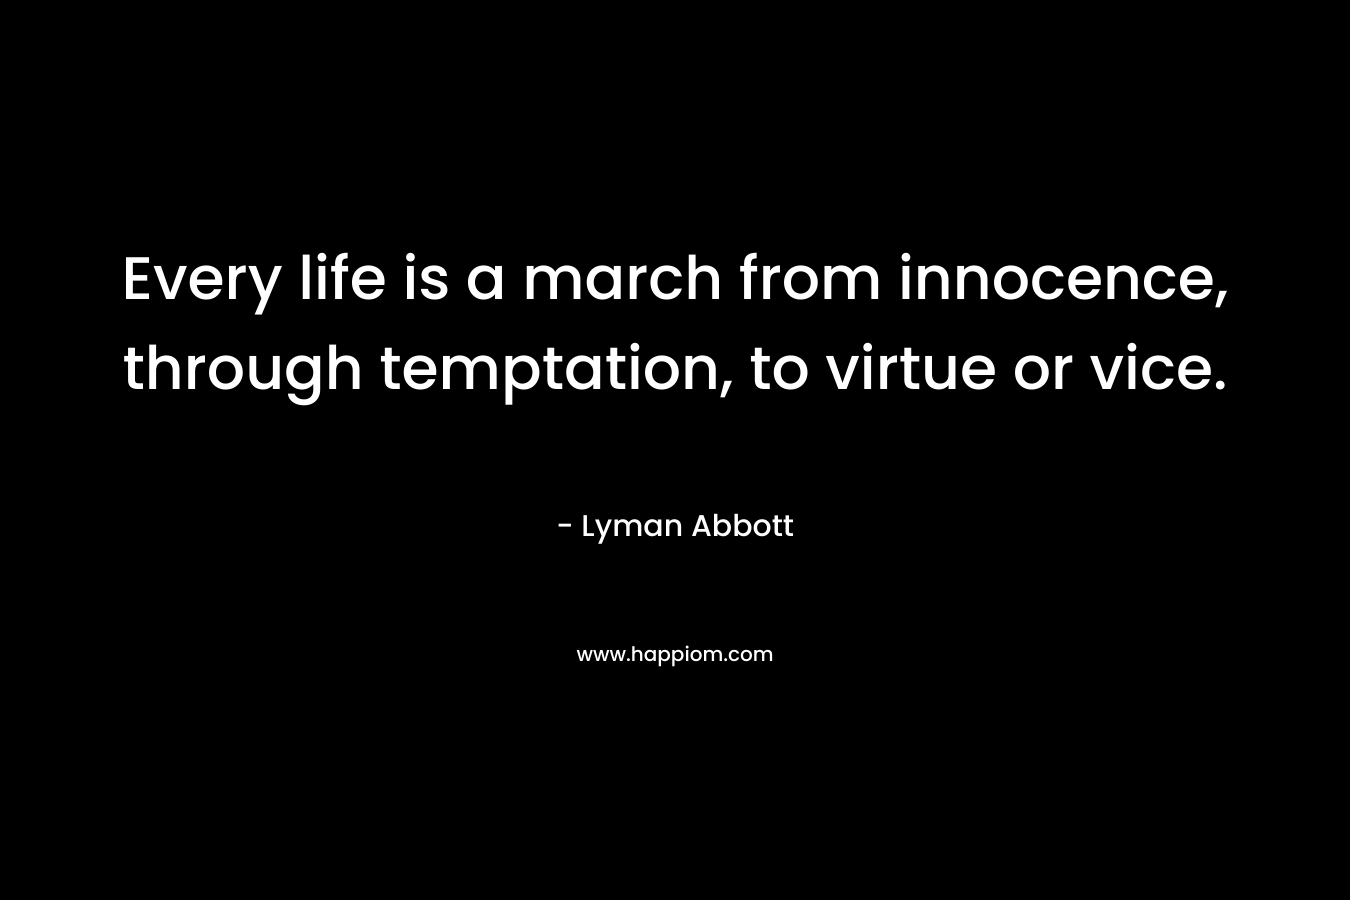 Every life is a march from innocence, through temptation, to virtue or vice. – Lyman Abbott